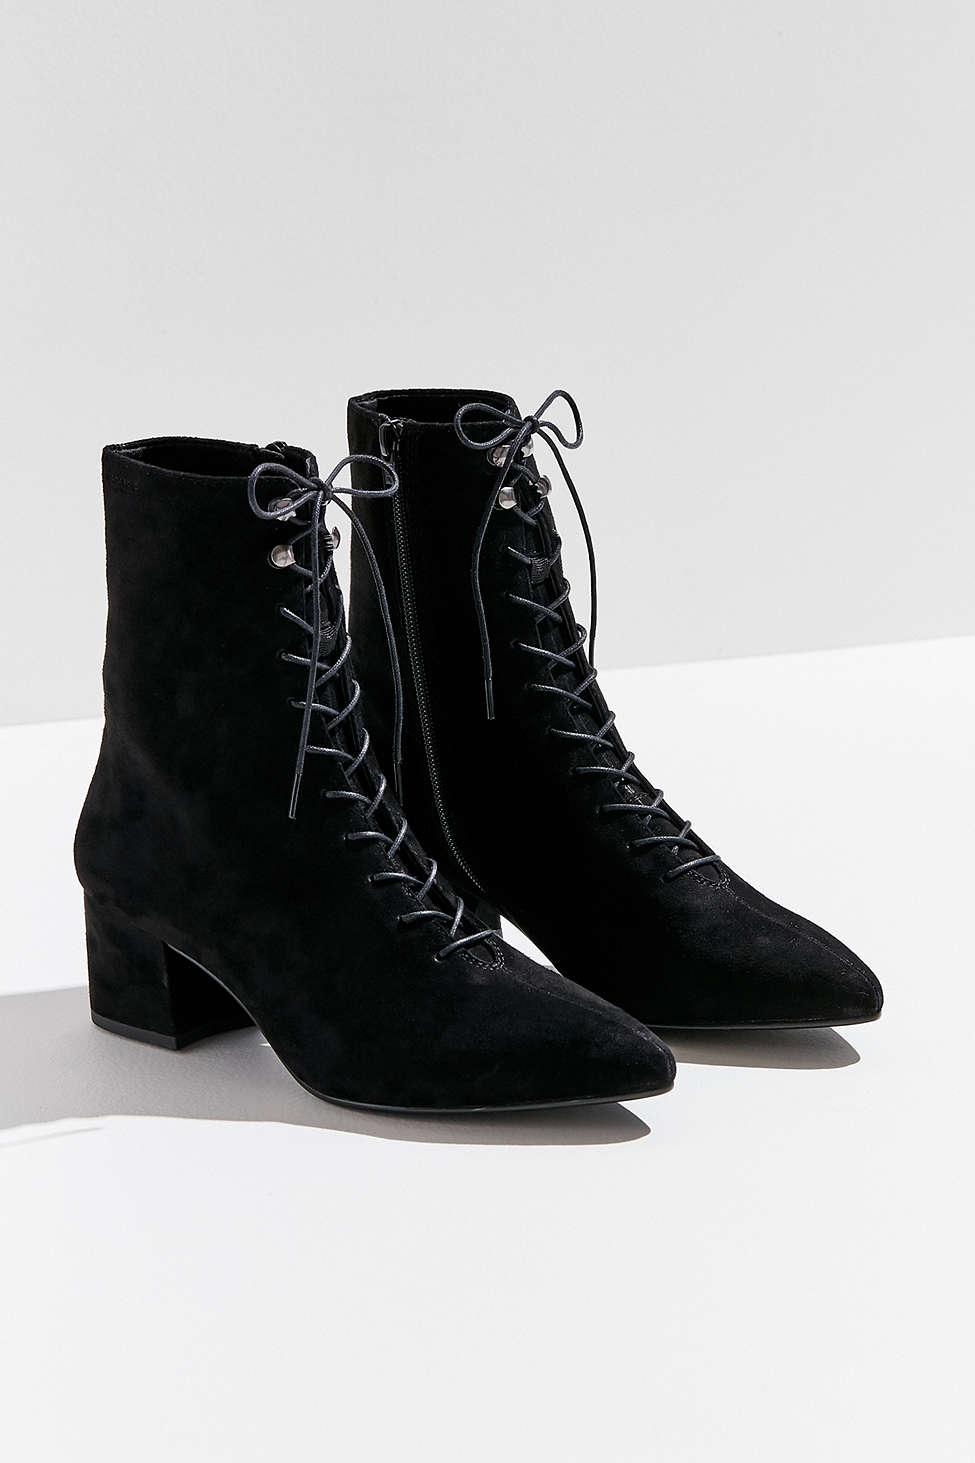 Vagabond Suede Mya Lace-up Boot in Black - Lyst